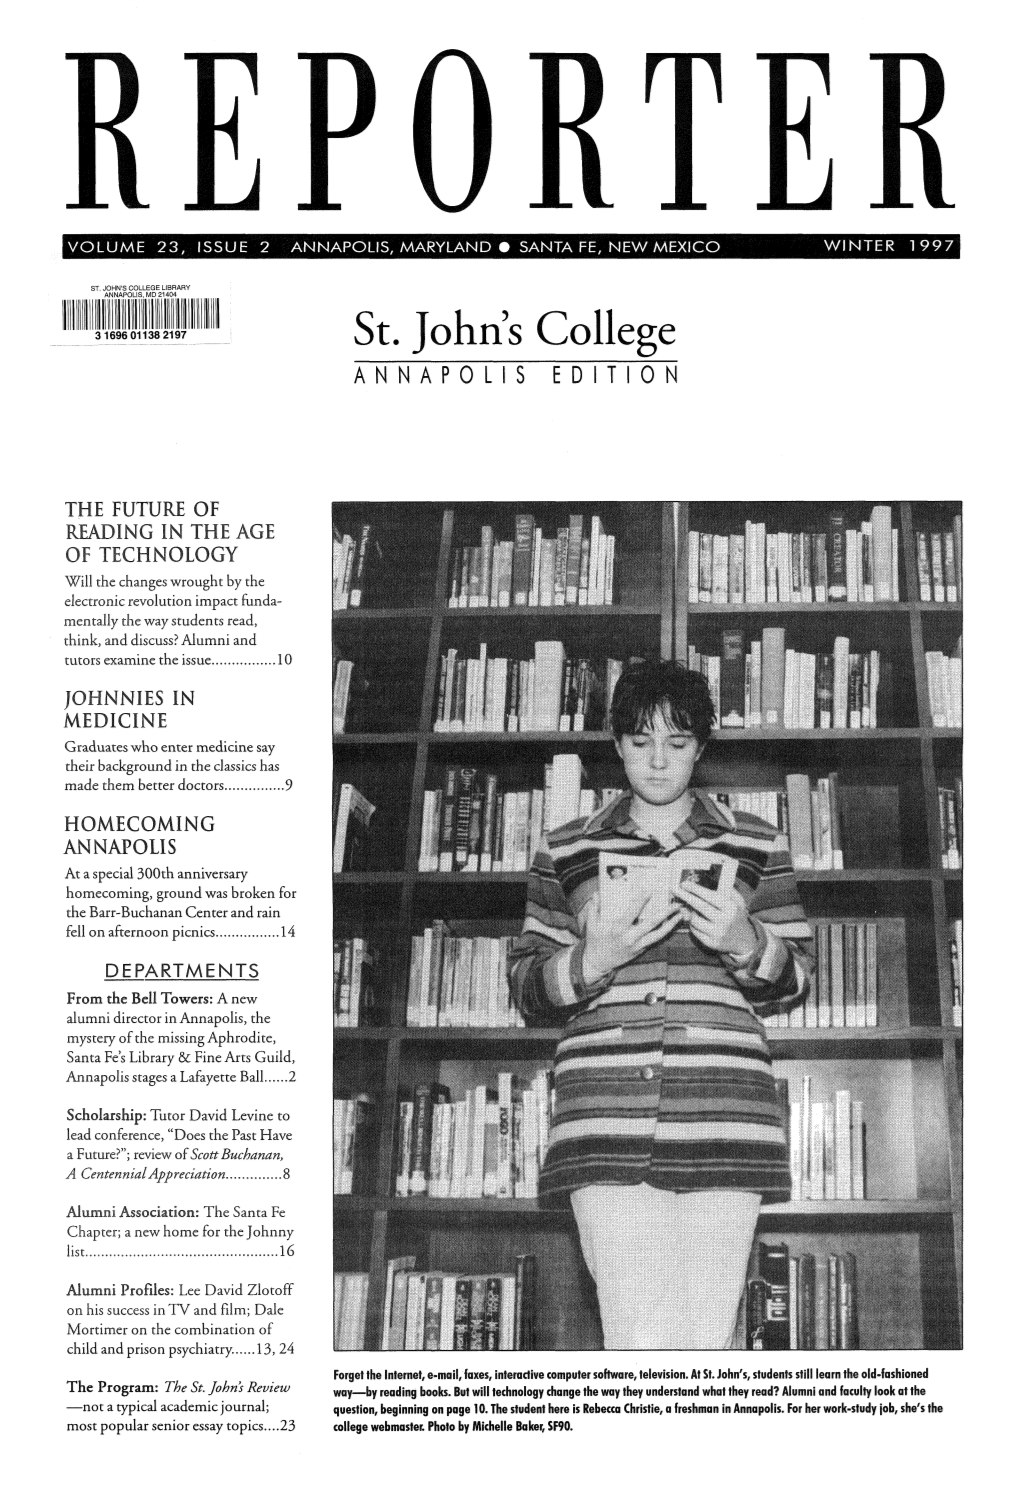 ST. JOHN's COLLEGE LIBRARY 11111111111111111~Nm11imr11m1111111111111111 31696 01138 2197 St